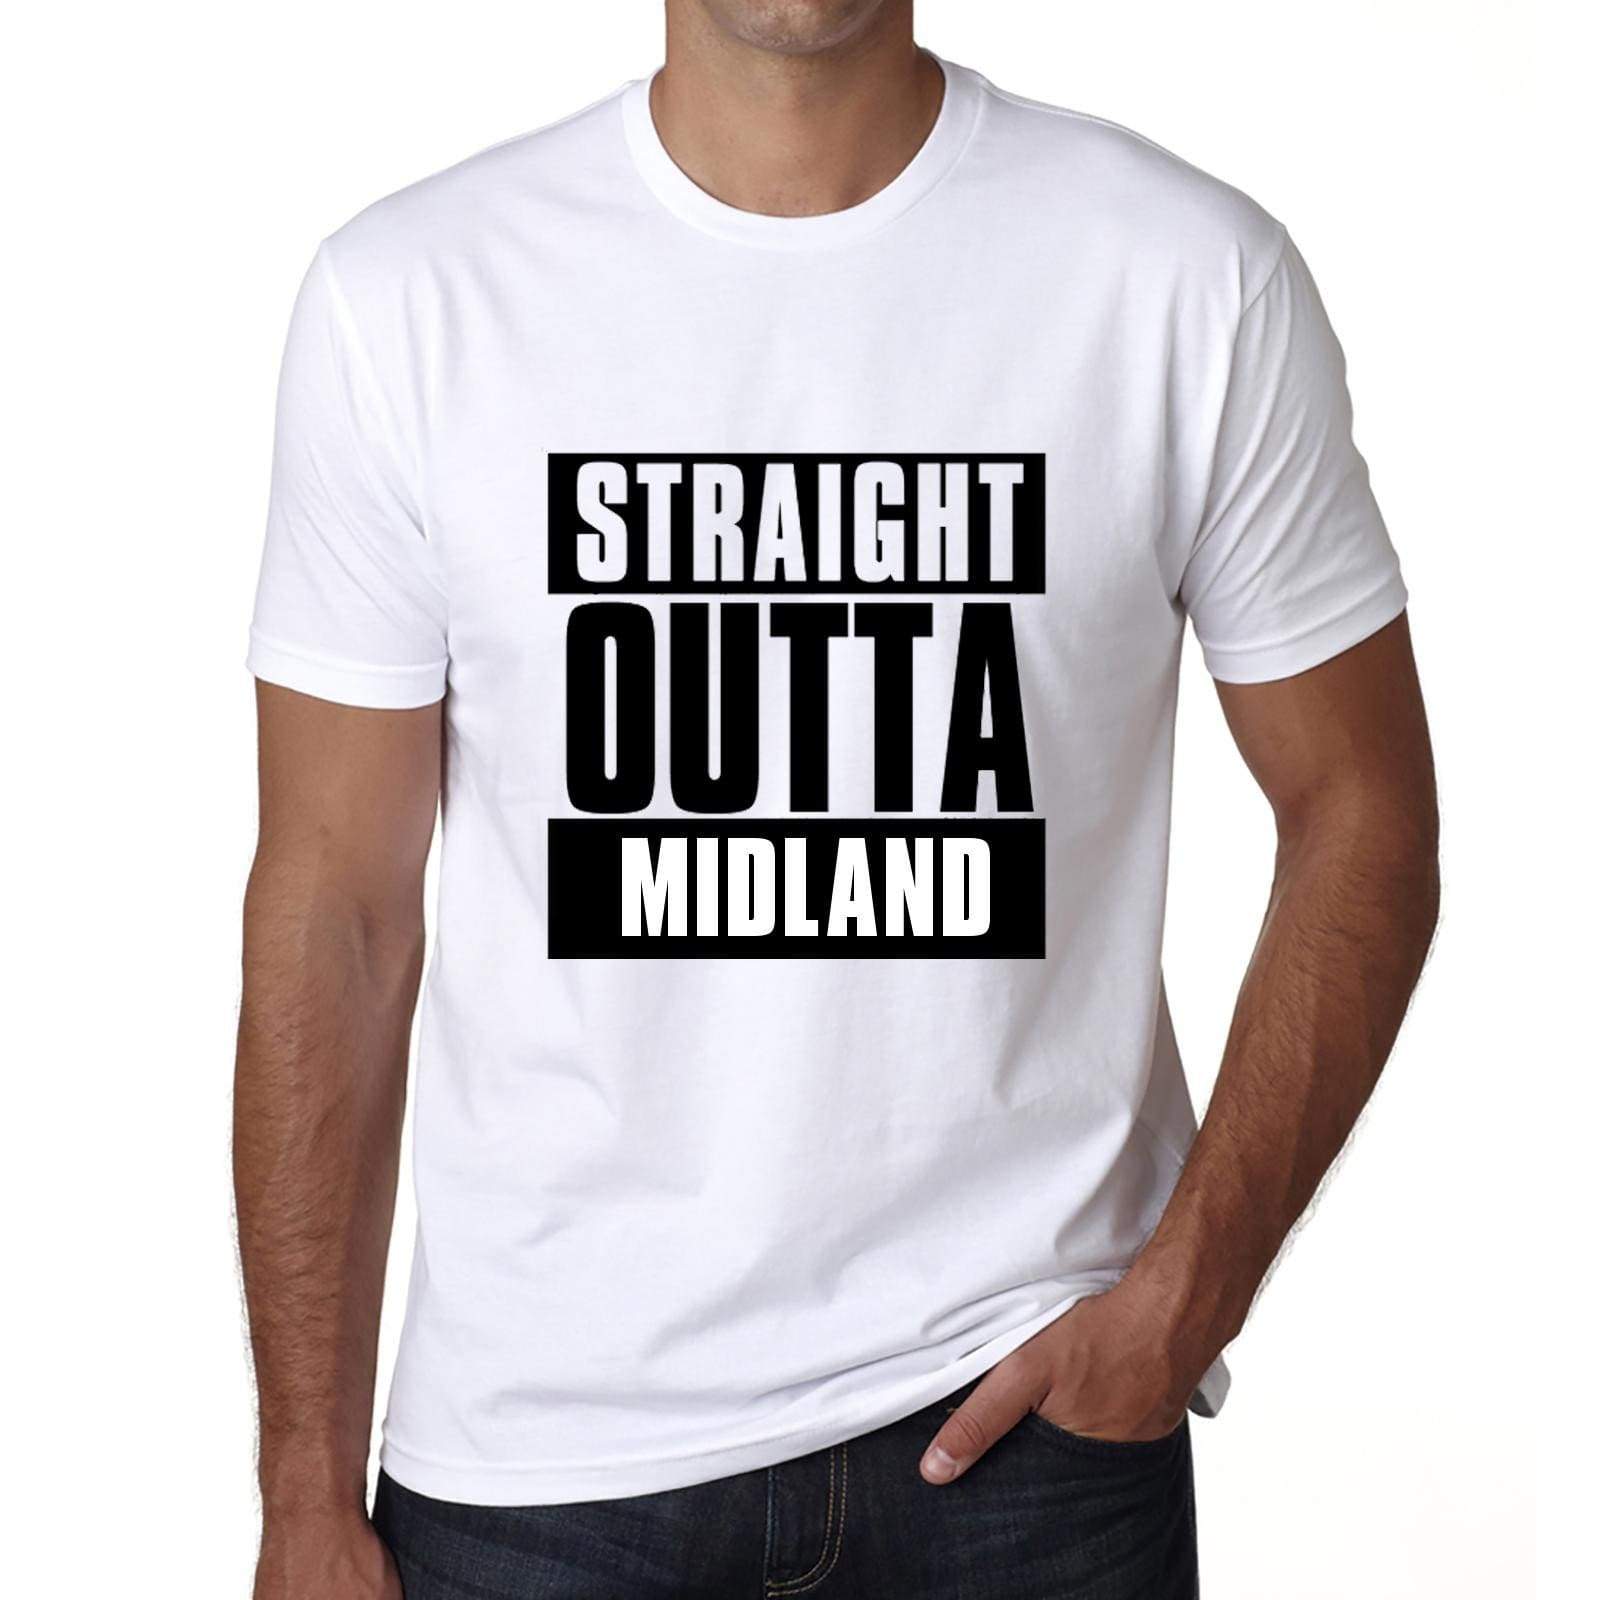 Straight Outta Midland Mens Short Sleeve Round Neck T-Shirt 00027 - White / S - Casual